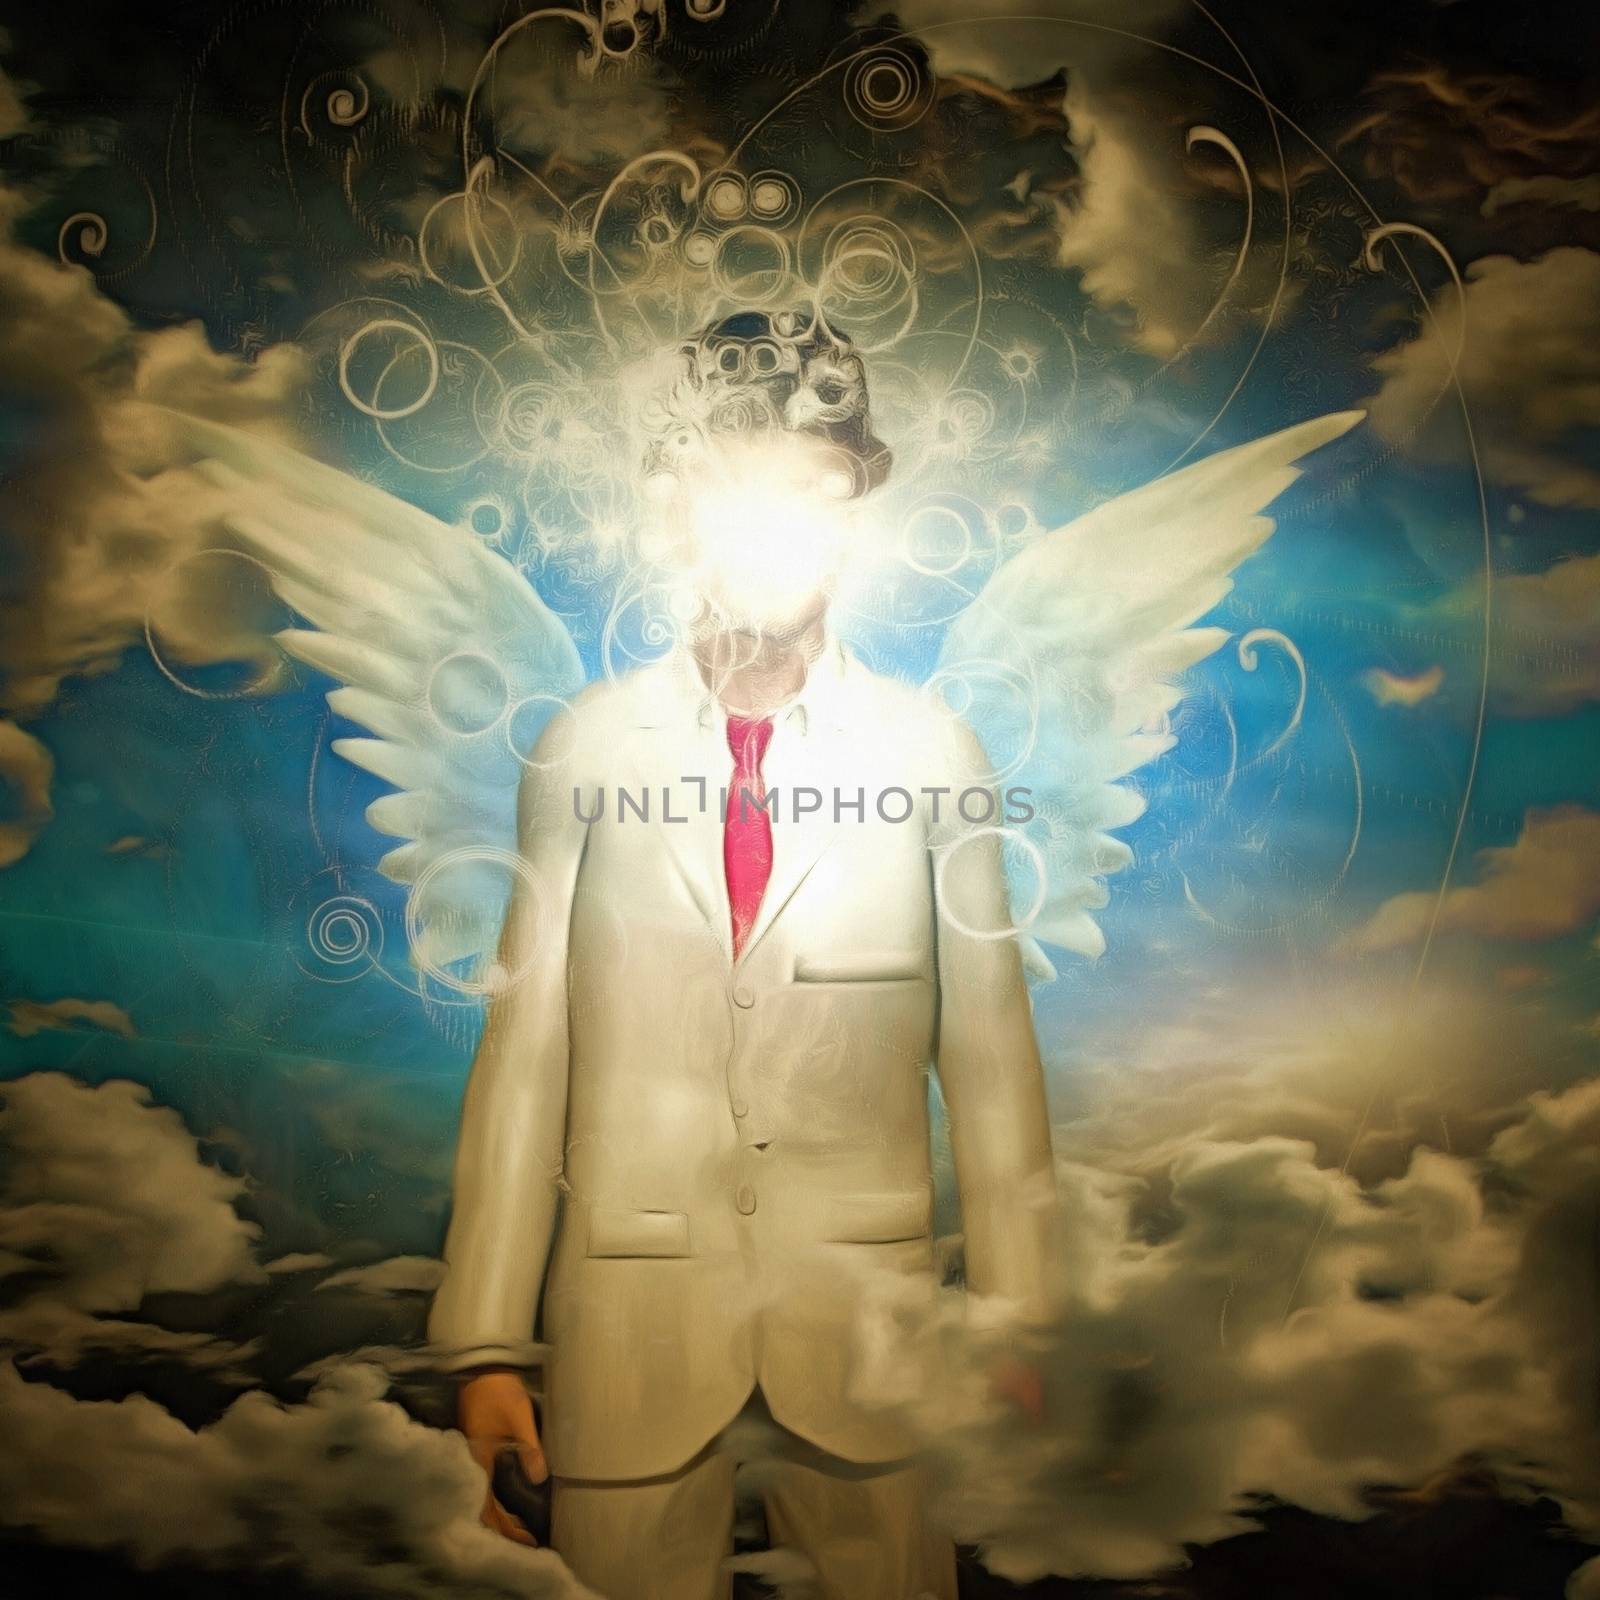 Surreal painting. Man in white suit with wings.